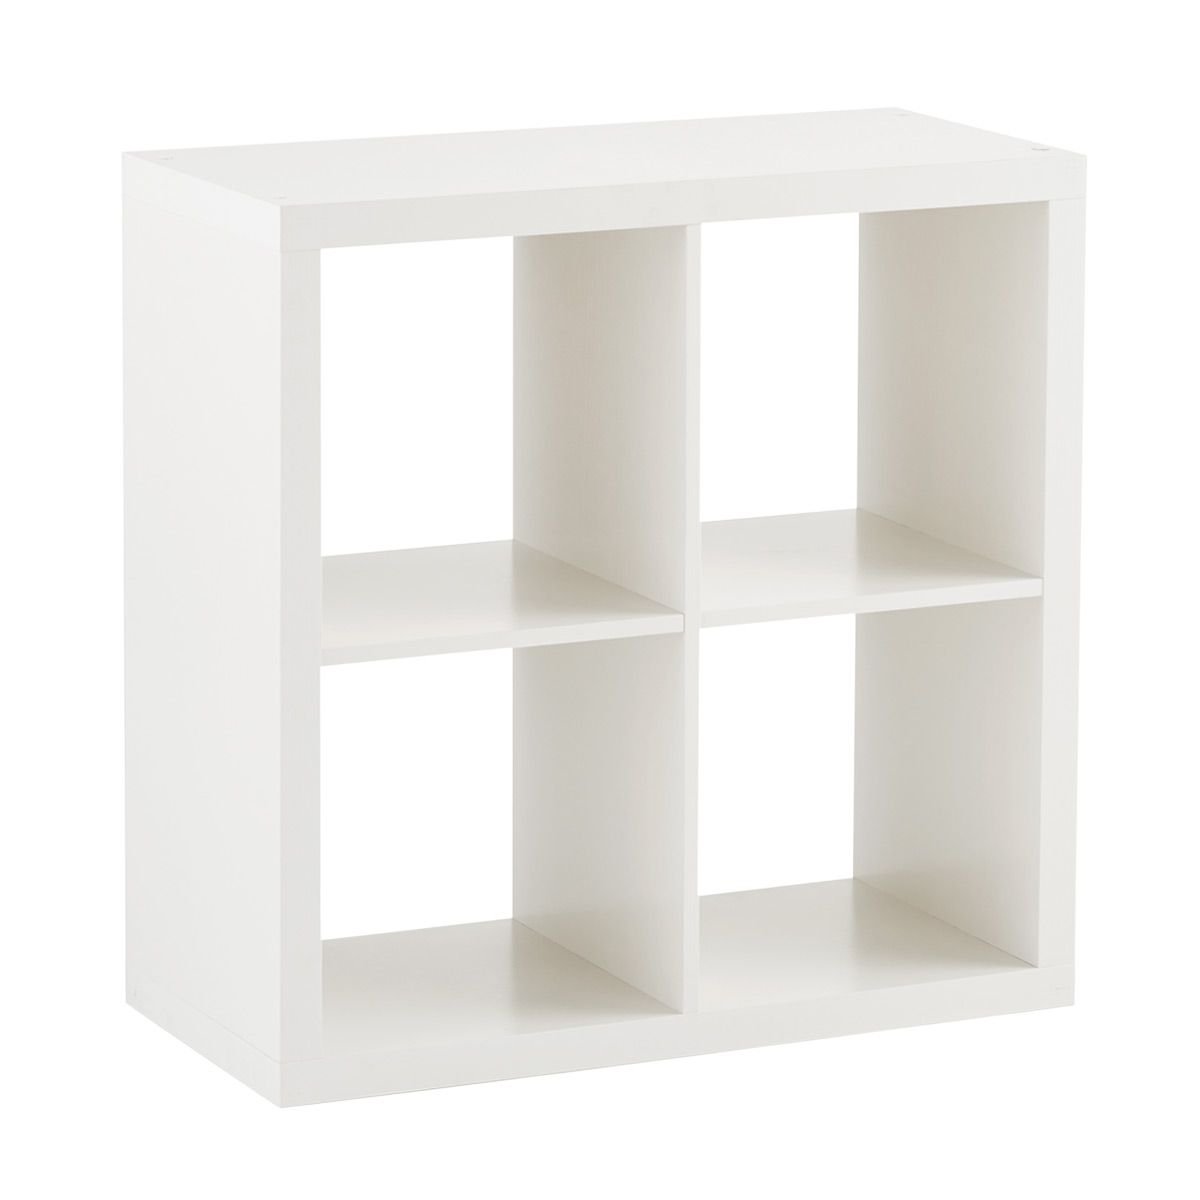 4-Cube Cubby Shelving | The Container Store